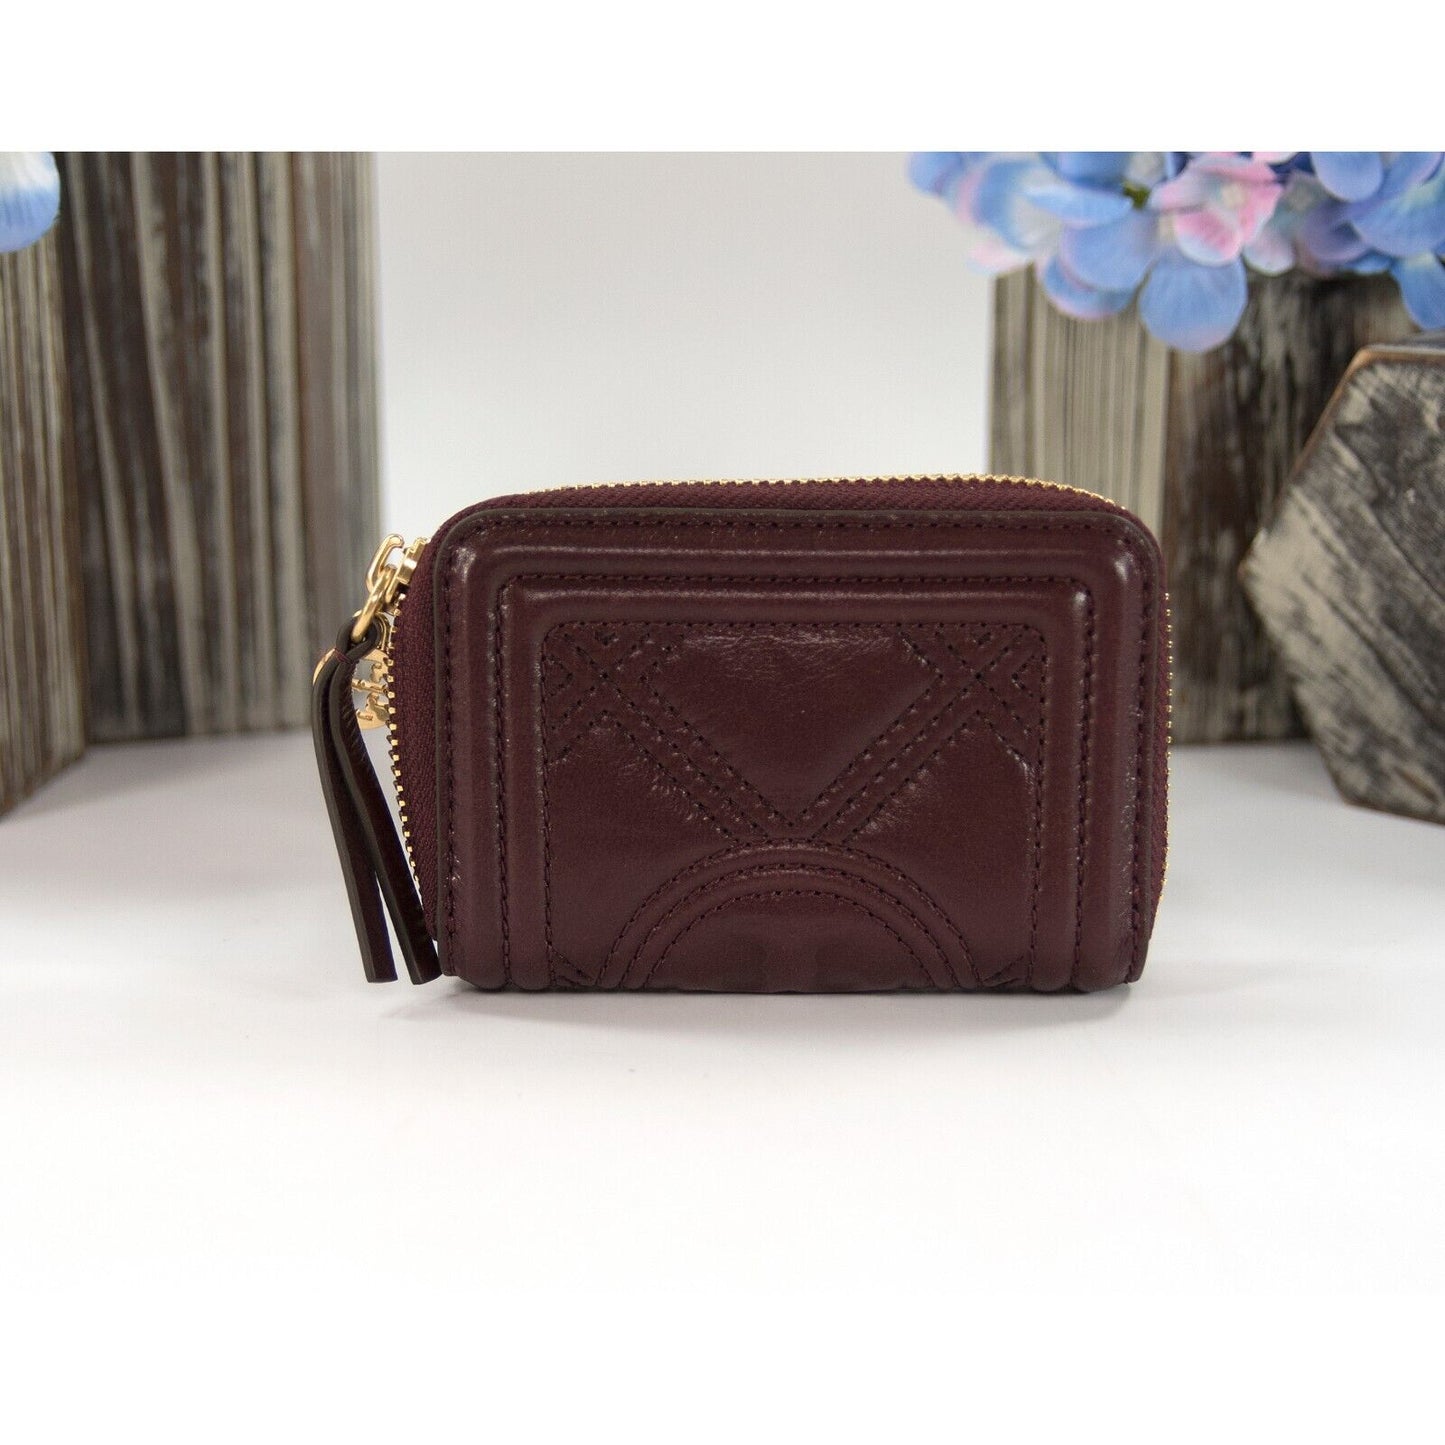 Tory Burch Nebbiolo Soft Waxed Leather Mini Compact Zip Around Wallet NWT